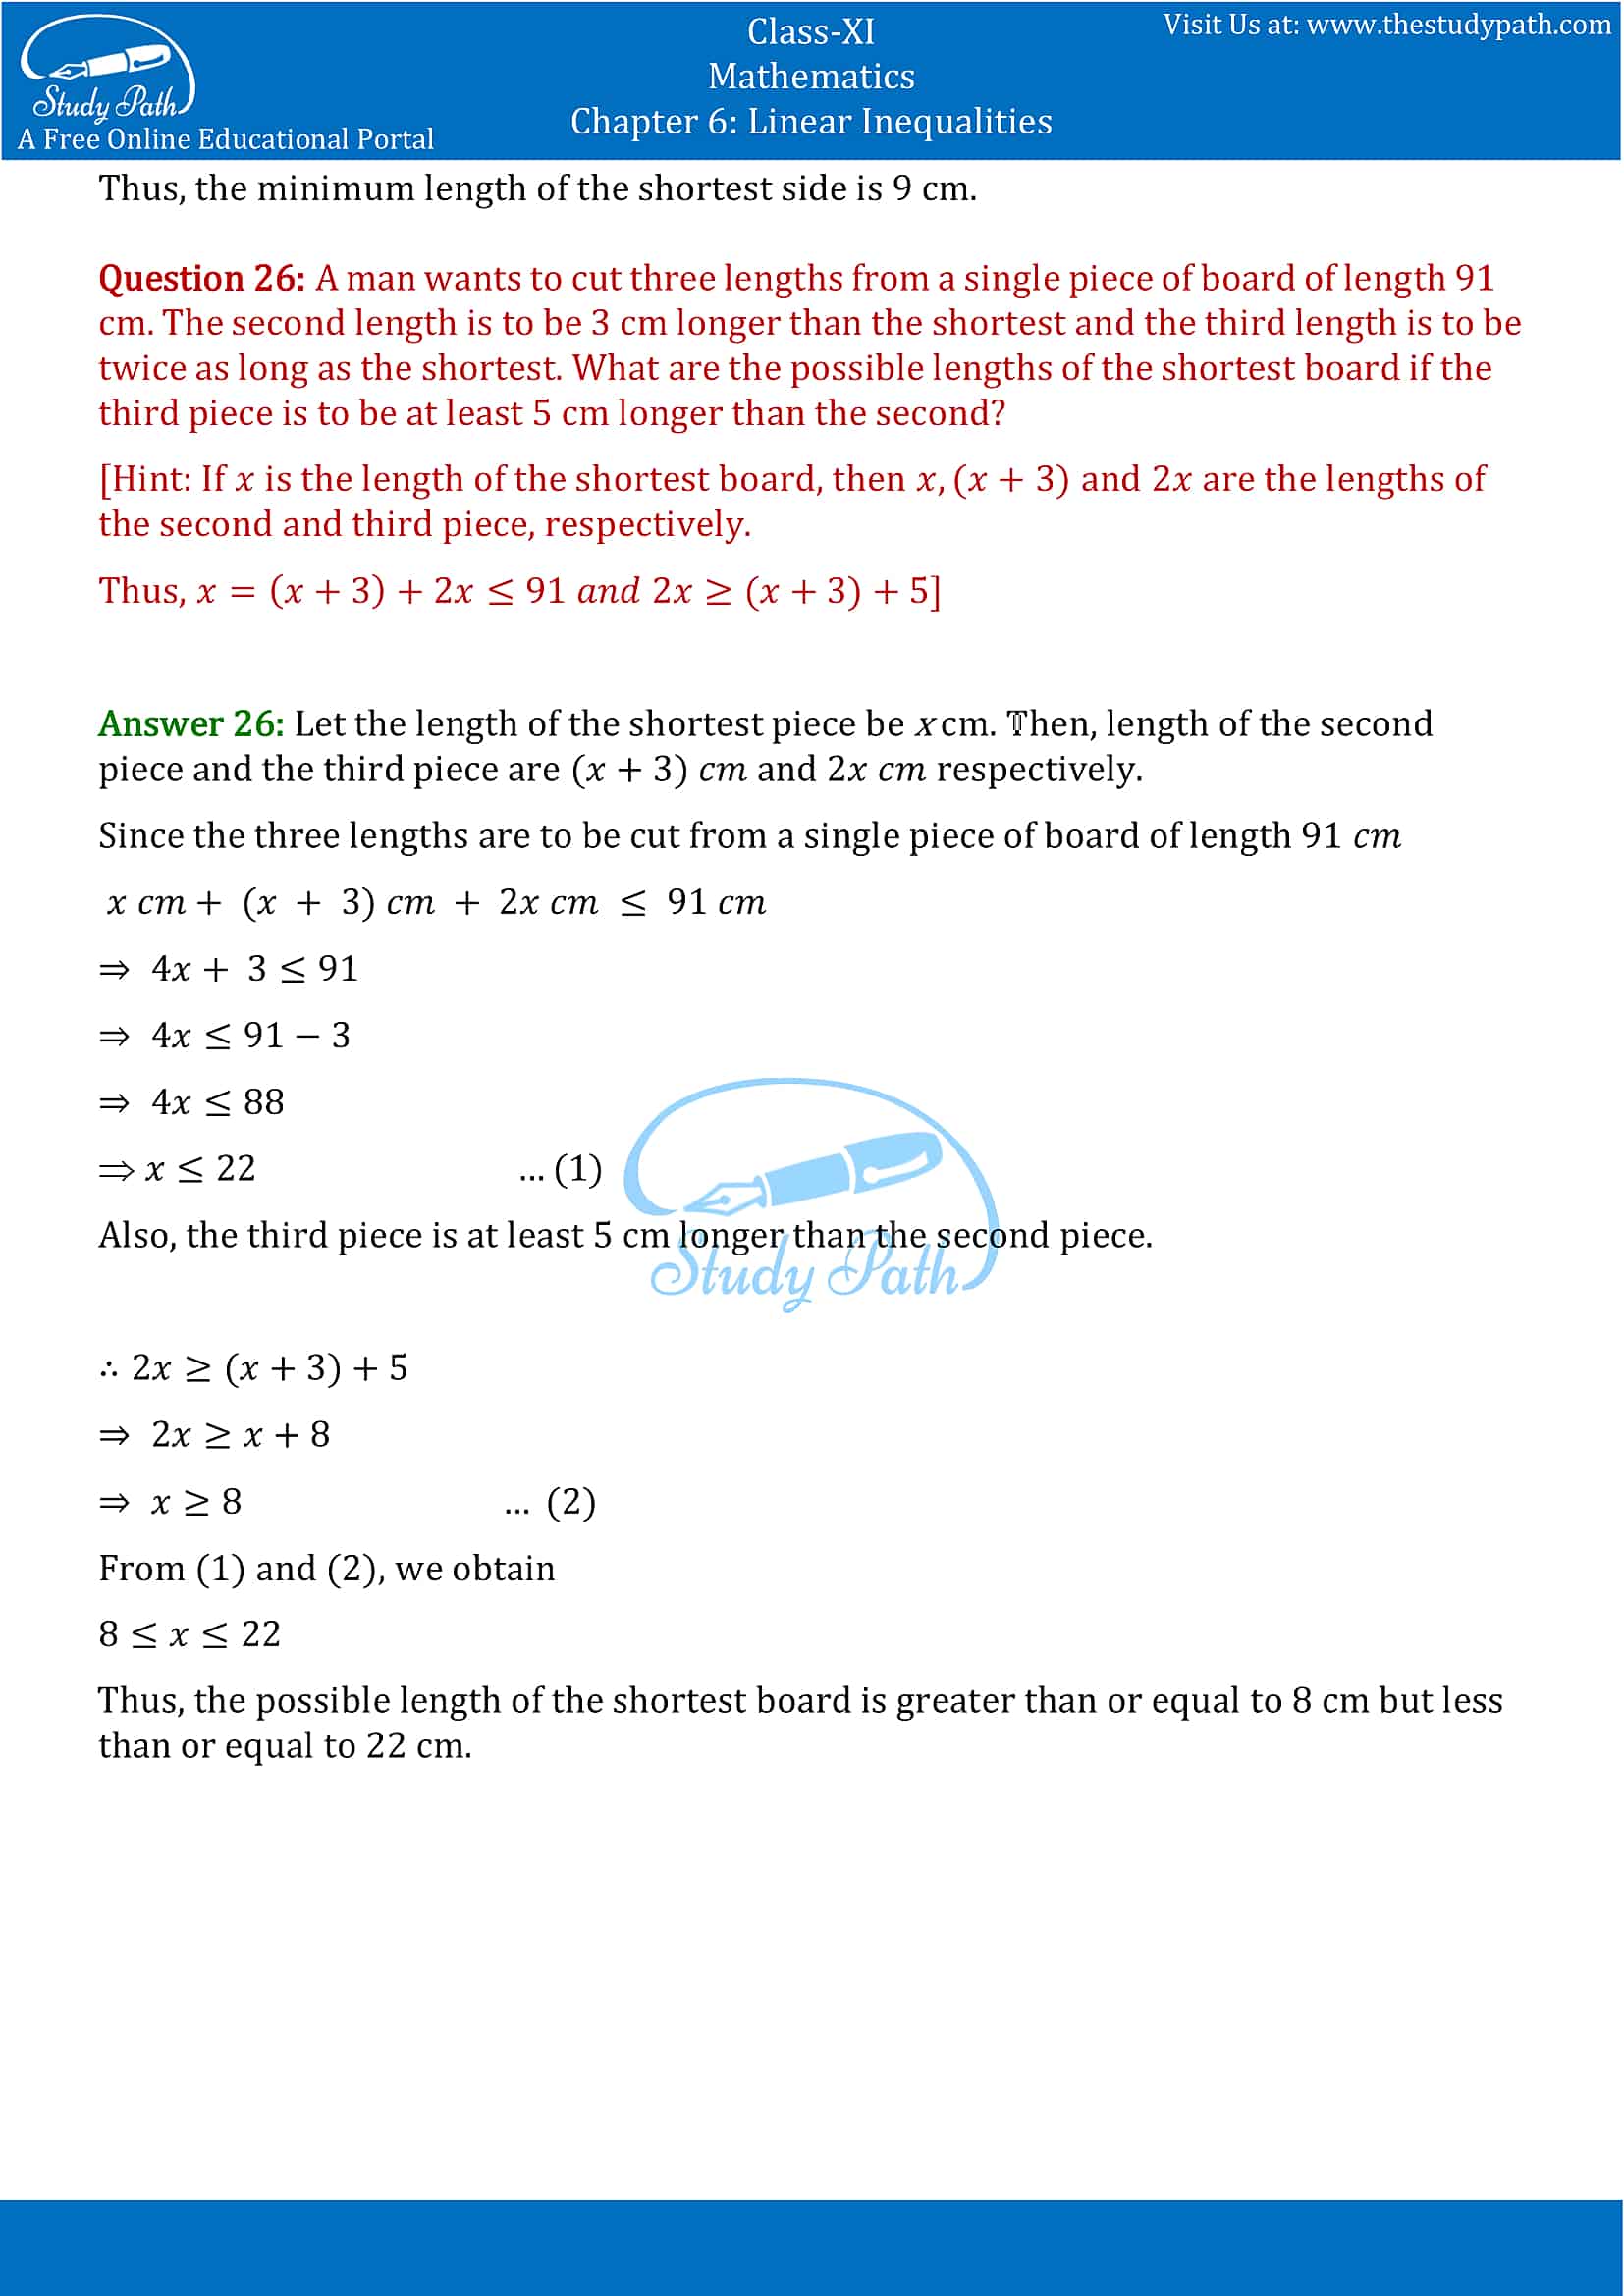 NCERT Solutions for Class 11 Maths chapter 6 Linear Inequalities Part-13